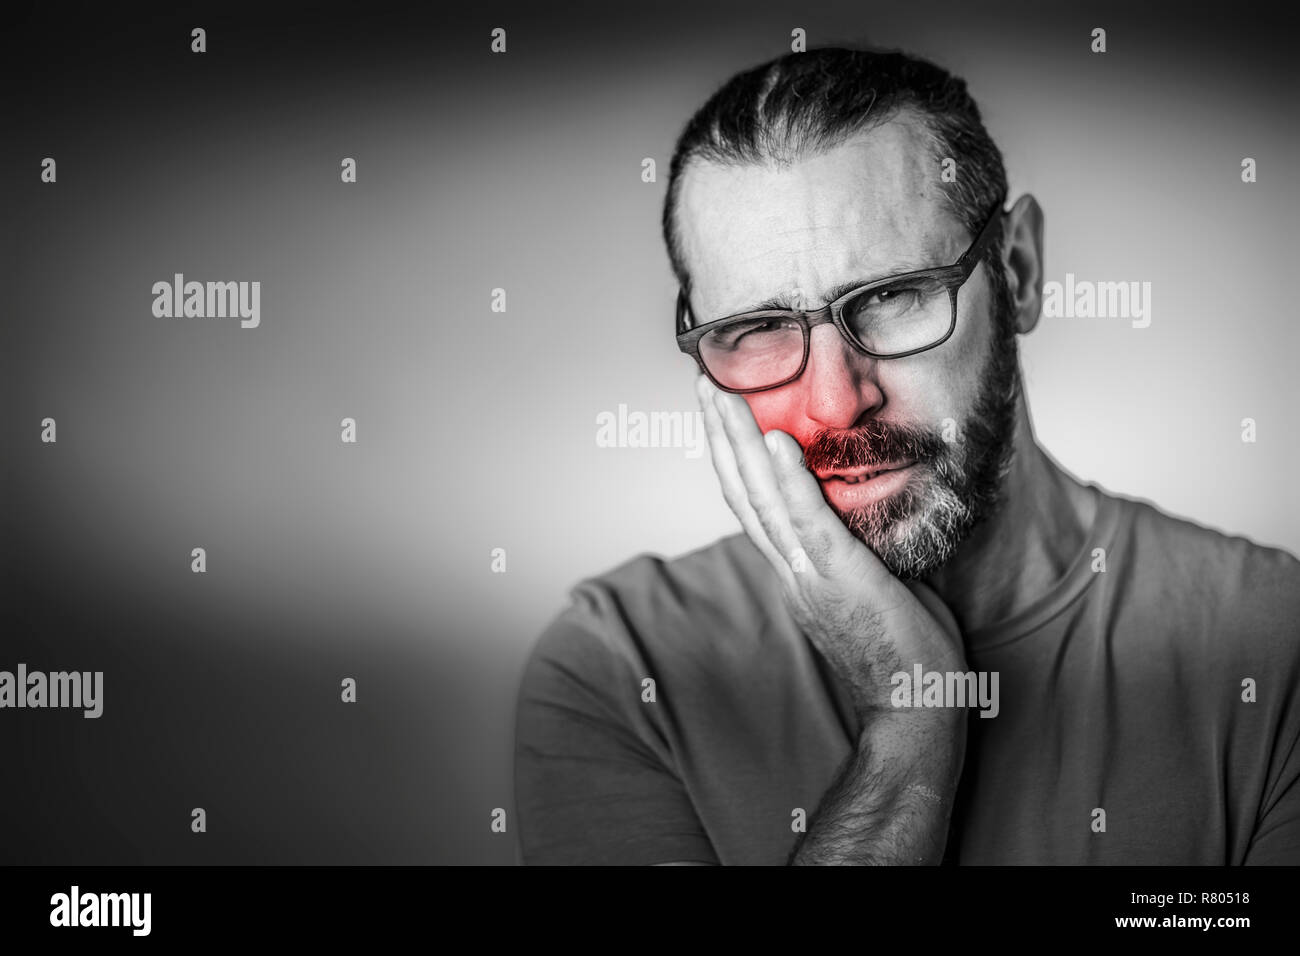 portrait of man with glasses and toothache Stock Photo